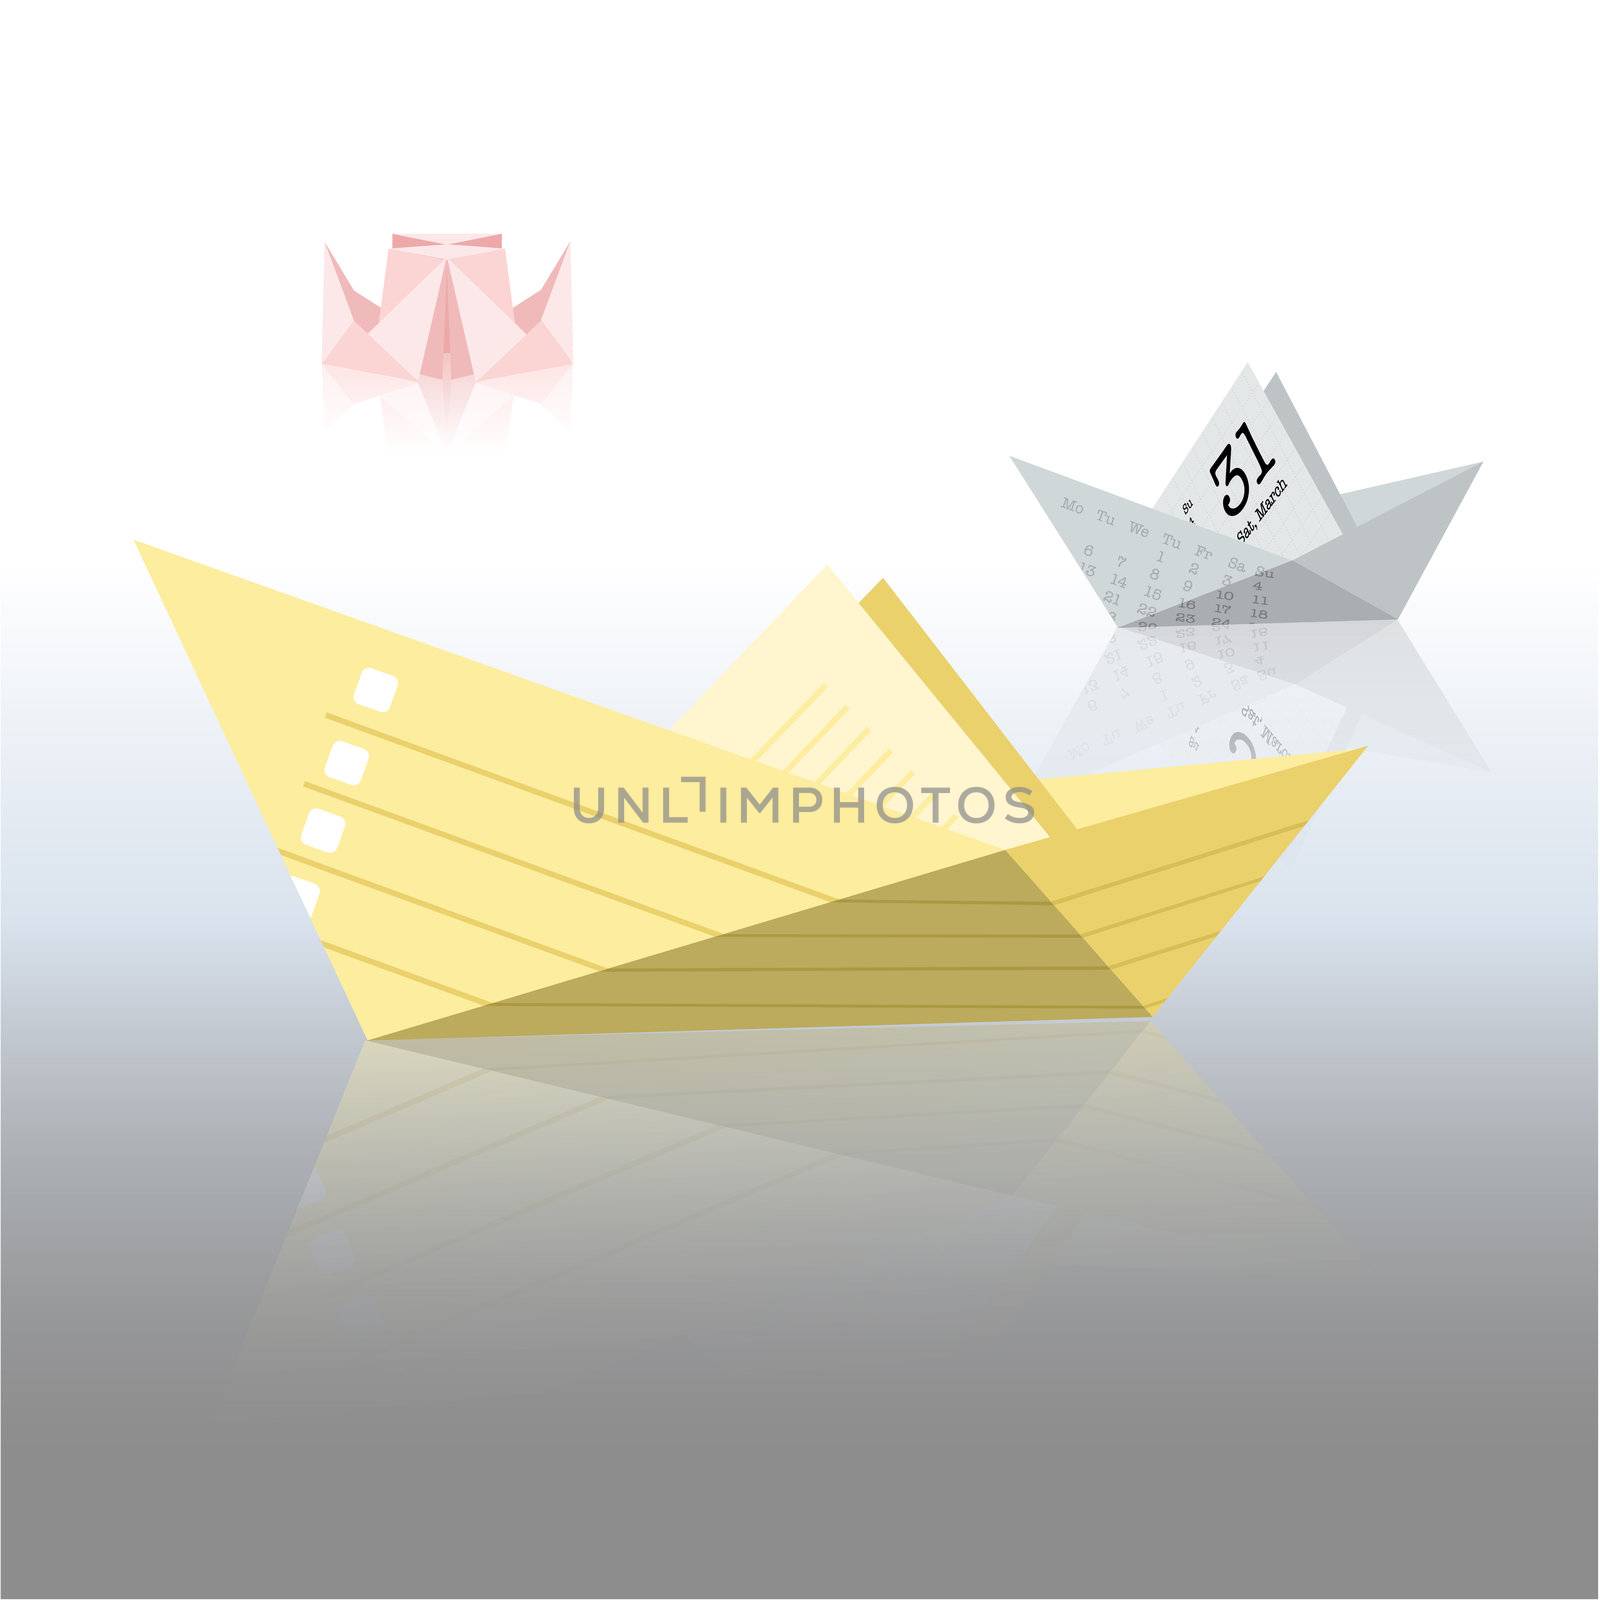 Everyday  tasks as paper boats by pics4sale